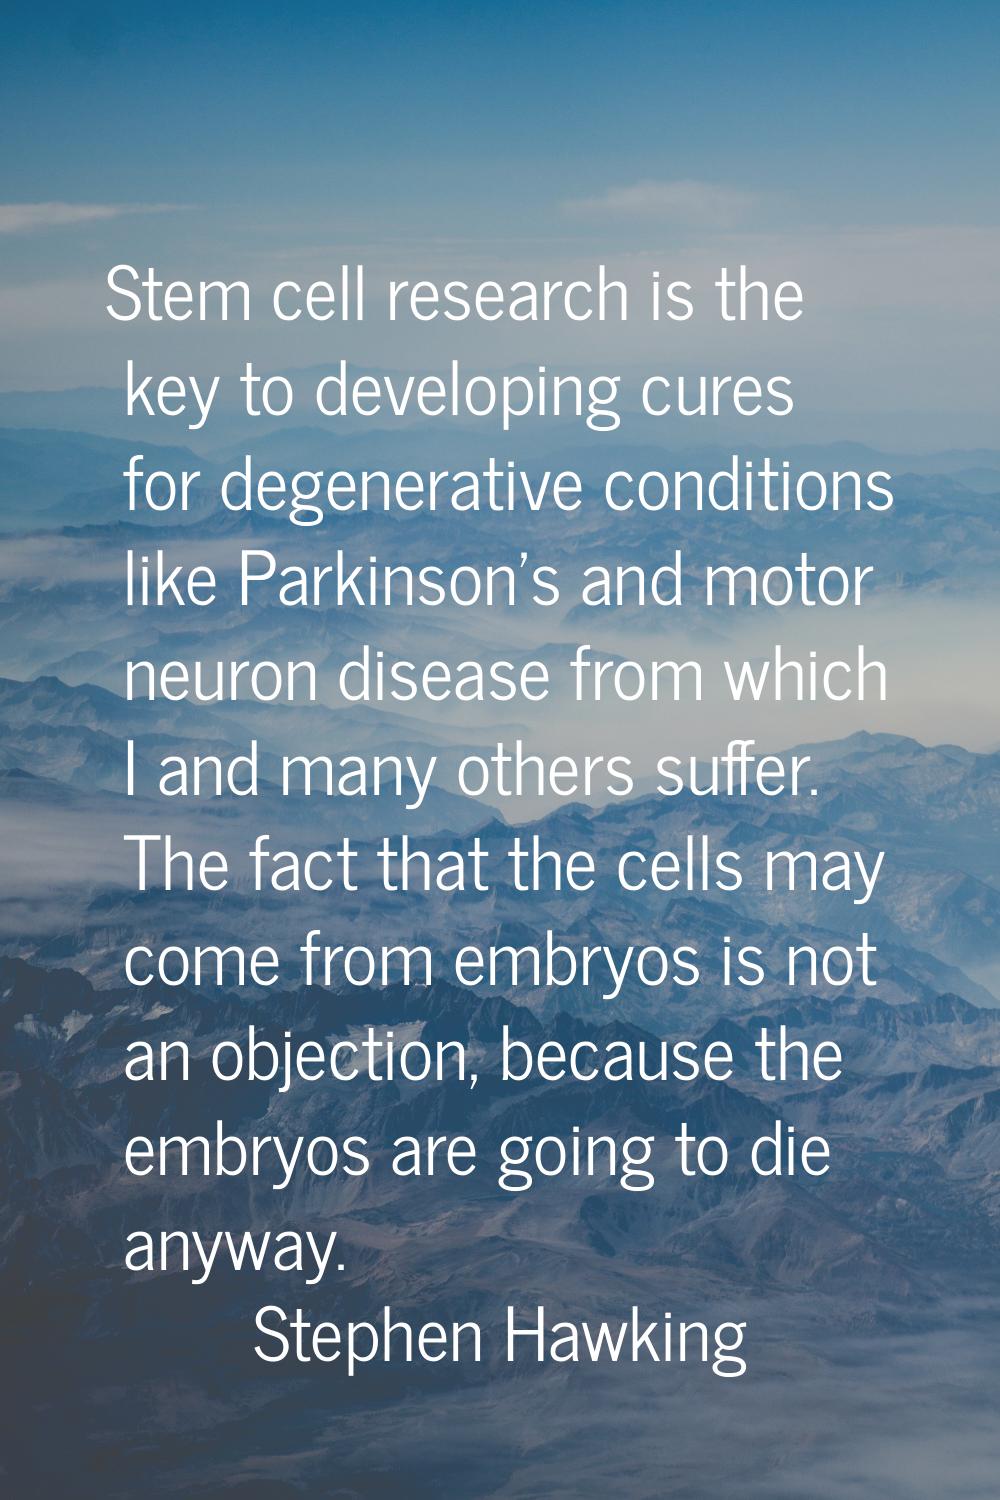 Stem cell research is the key to developing cures for degenerative conditions like Parkinson's and 